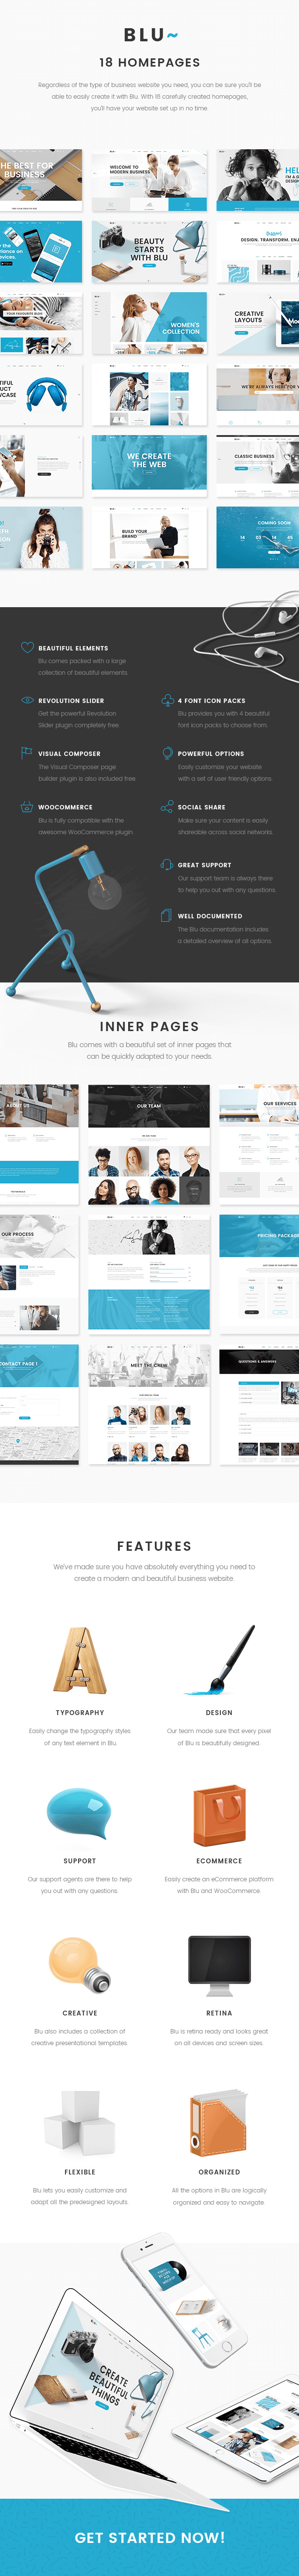 blu2 - Blu - A Beautiful Theme for Businesses and Individuals